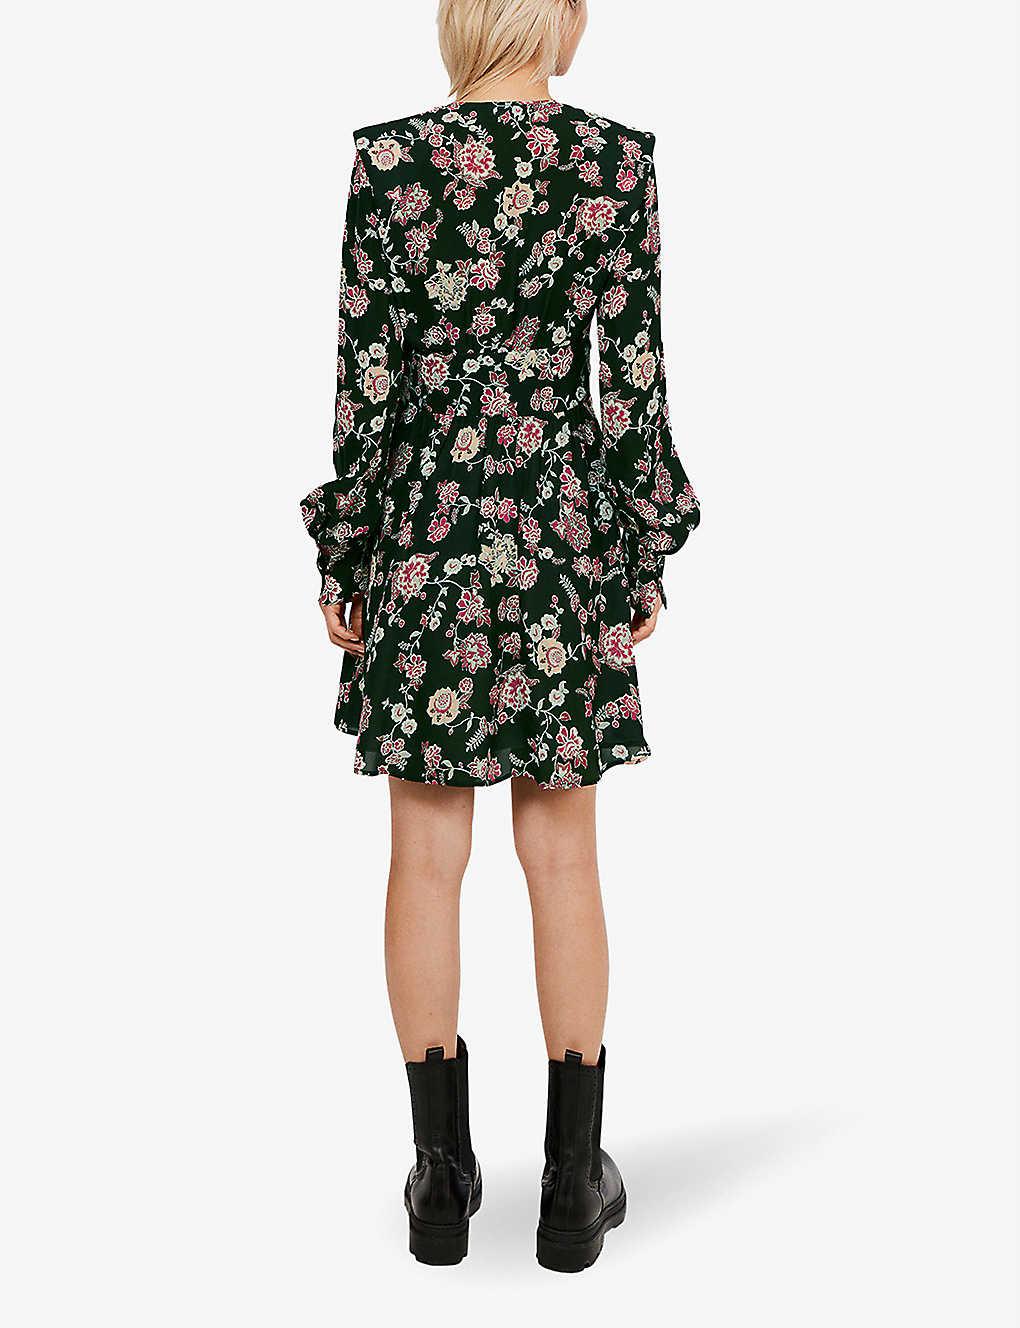 Claudie Pierlot Synthetic Reflex Floral Embroidered Crepe Dress in Black -  Lyst